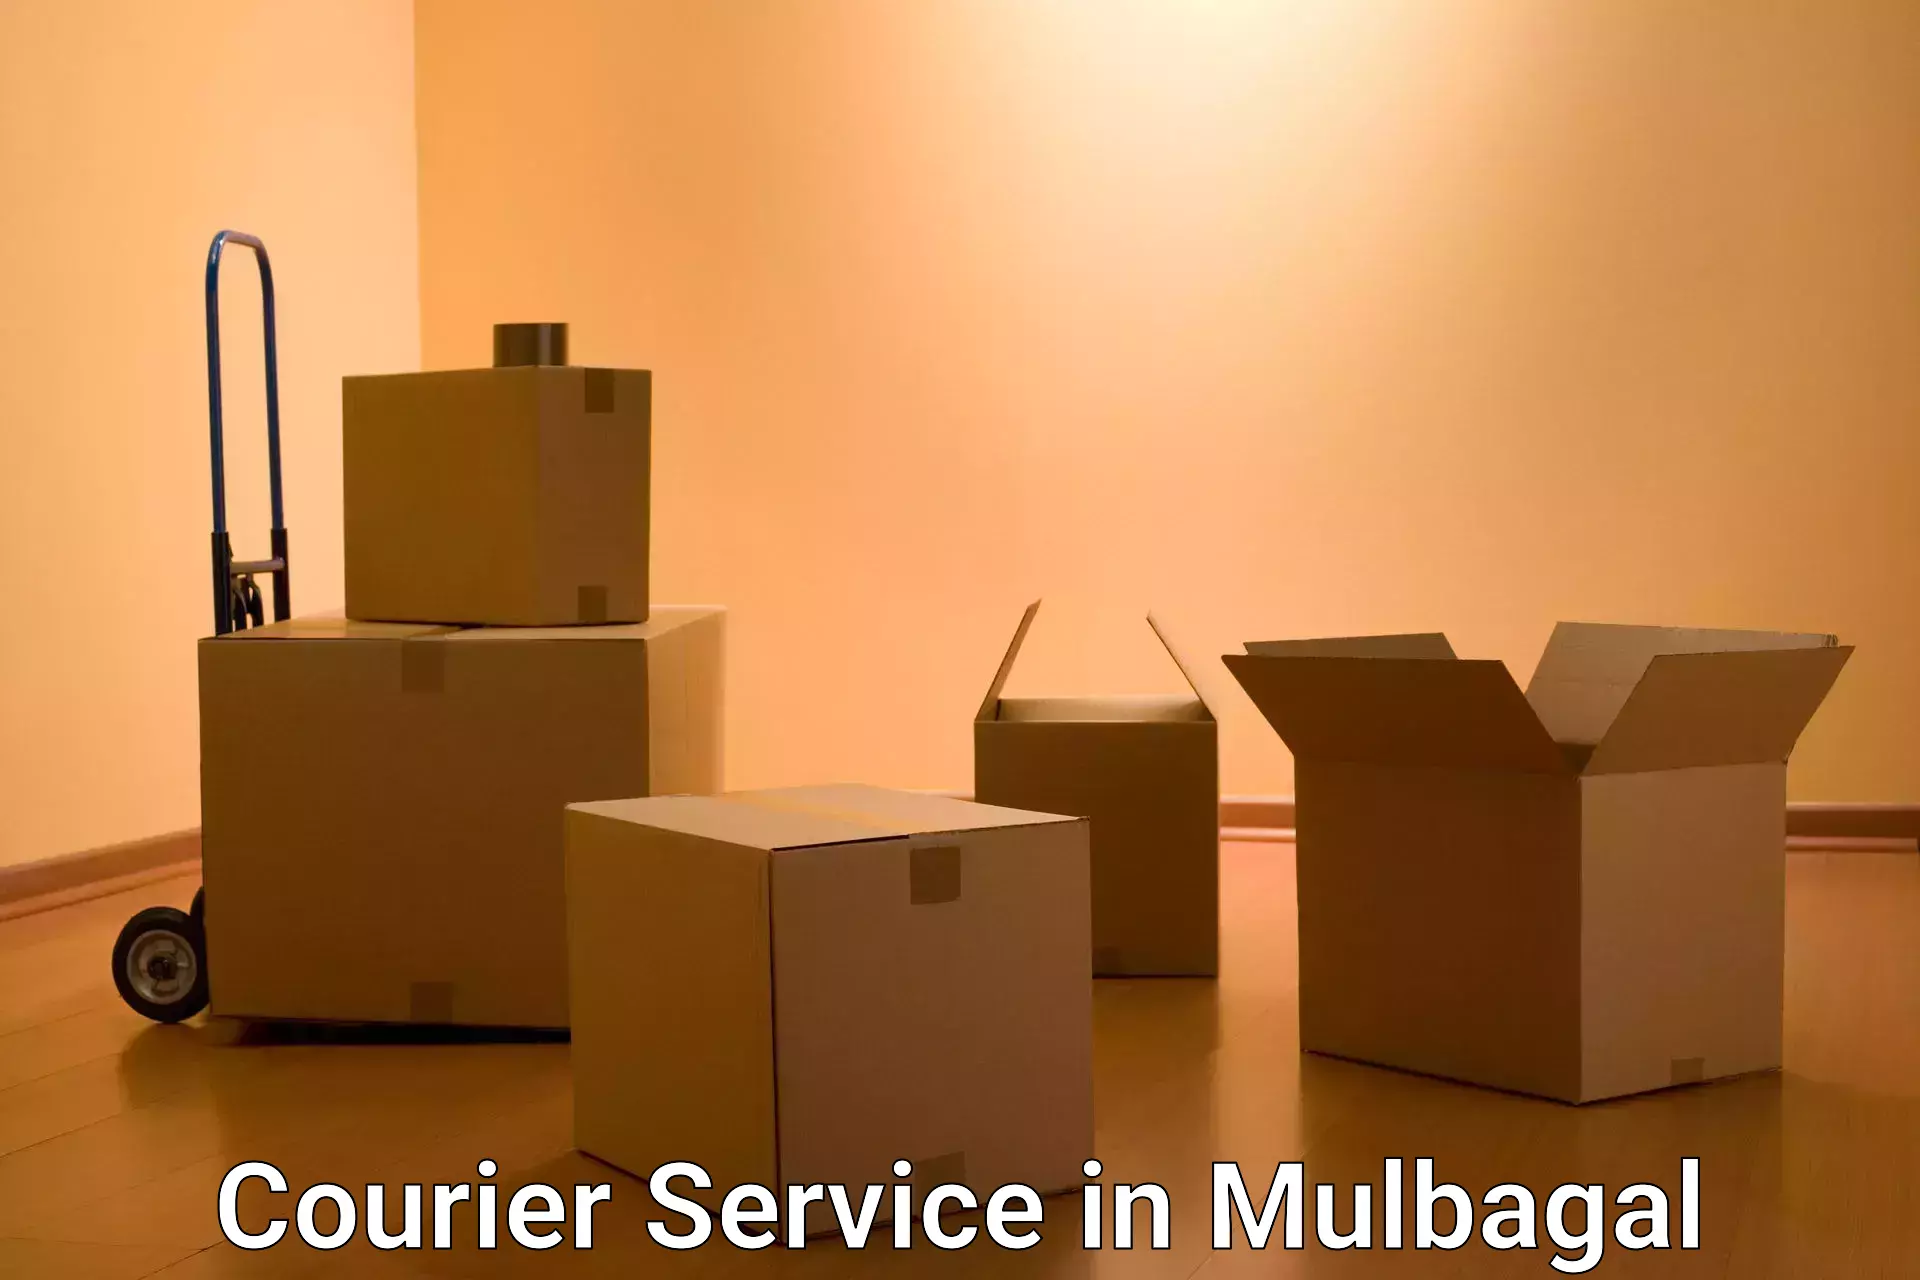 Budget-friendly shipping in Mulbagal